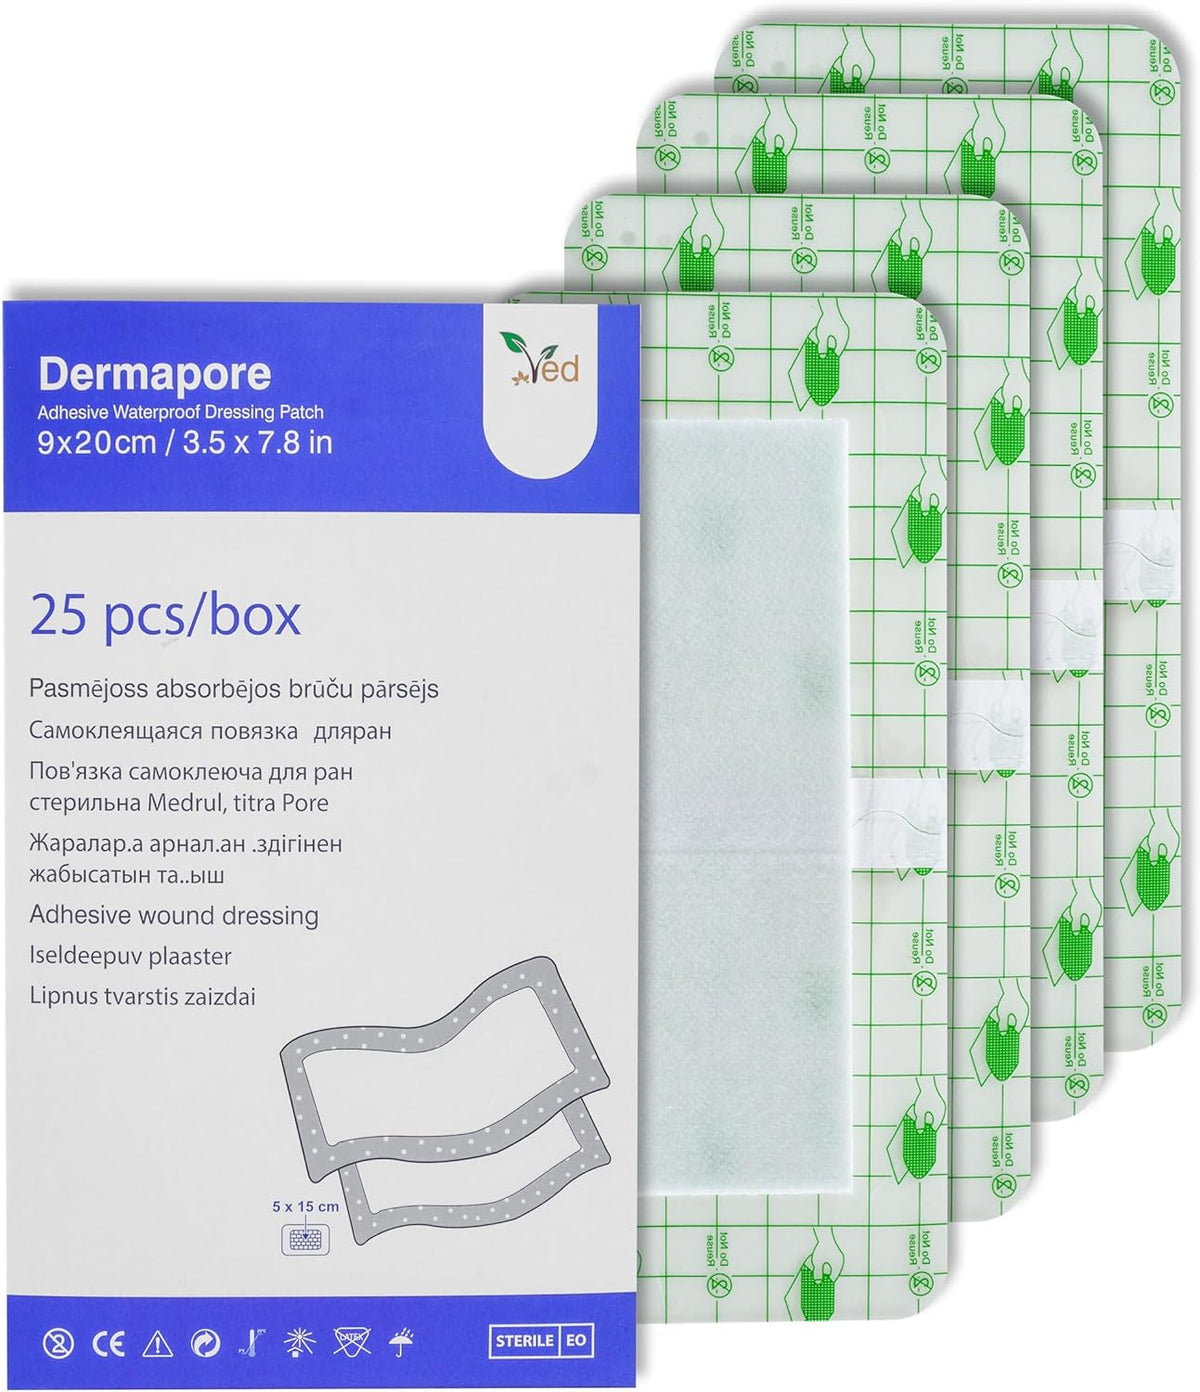 VED Dermapore Waterproof Adhesive Wound Dressing- Suitable for cuts and grazes, Diabetic Leg ulcers, venous Leg ulcers, Small Pressure sores- Medium, 9 x 20cm (Pack of 25).